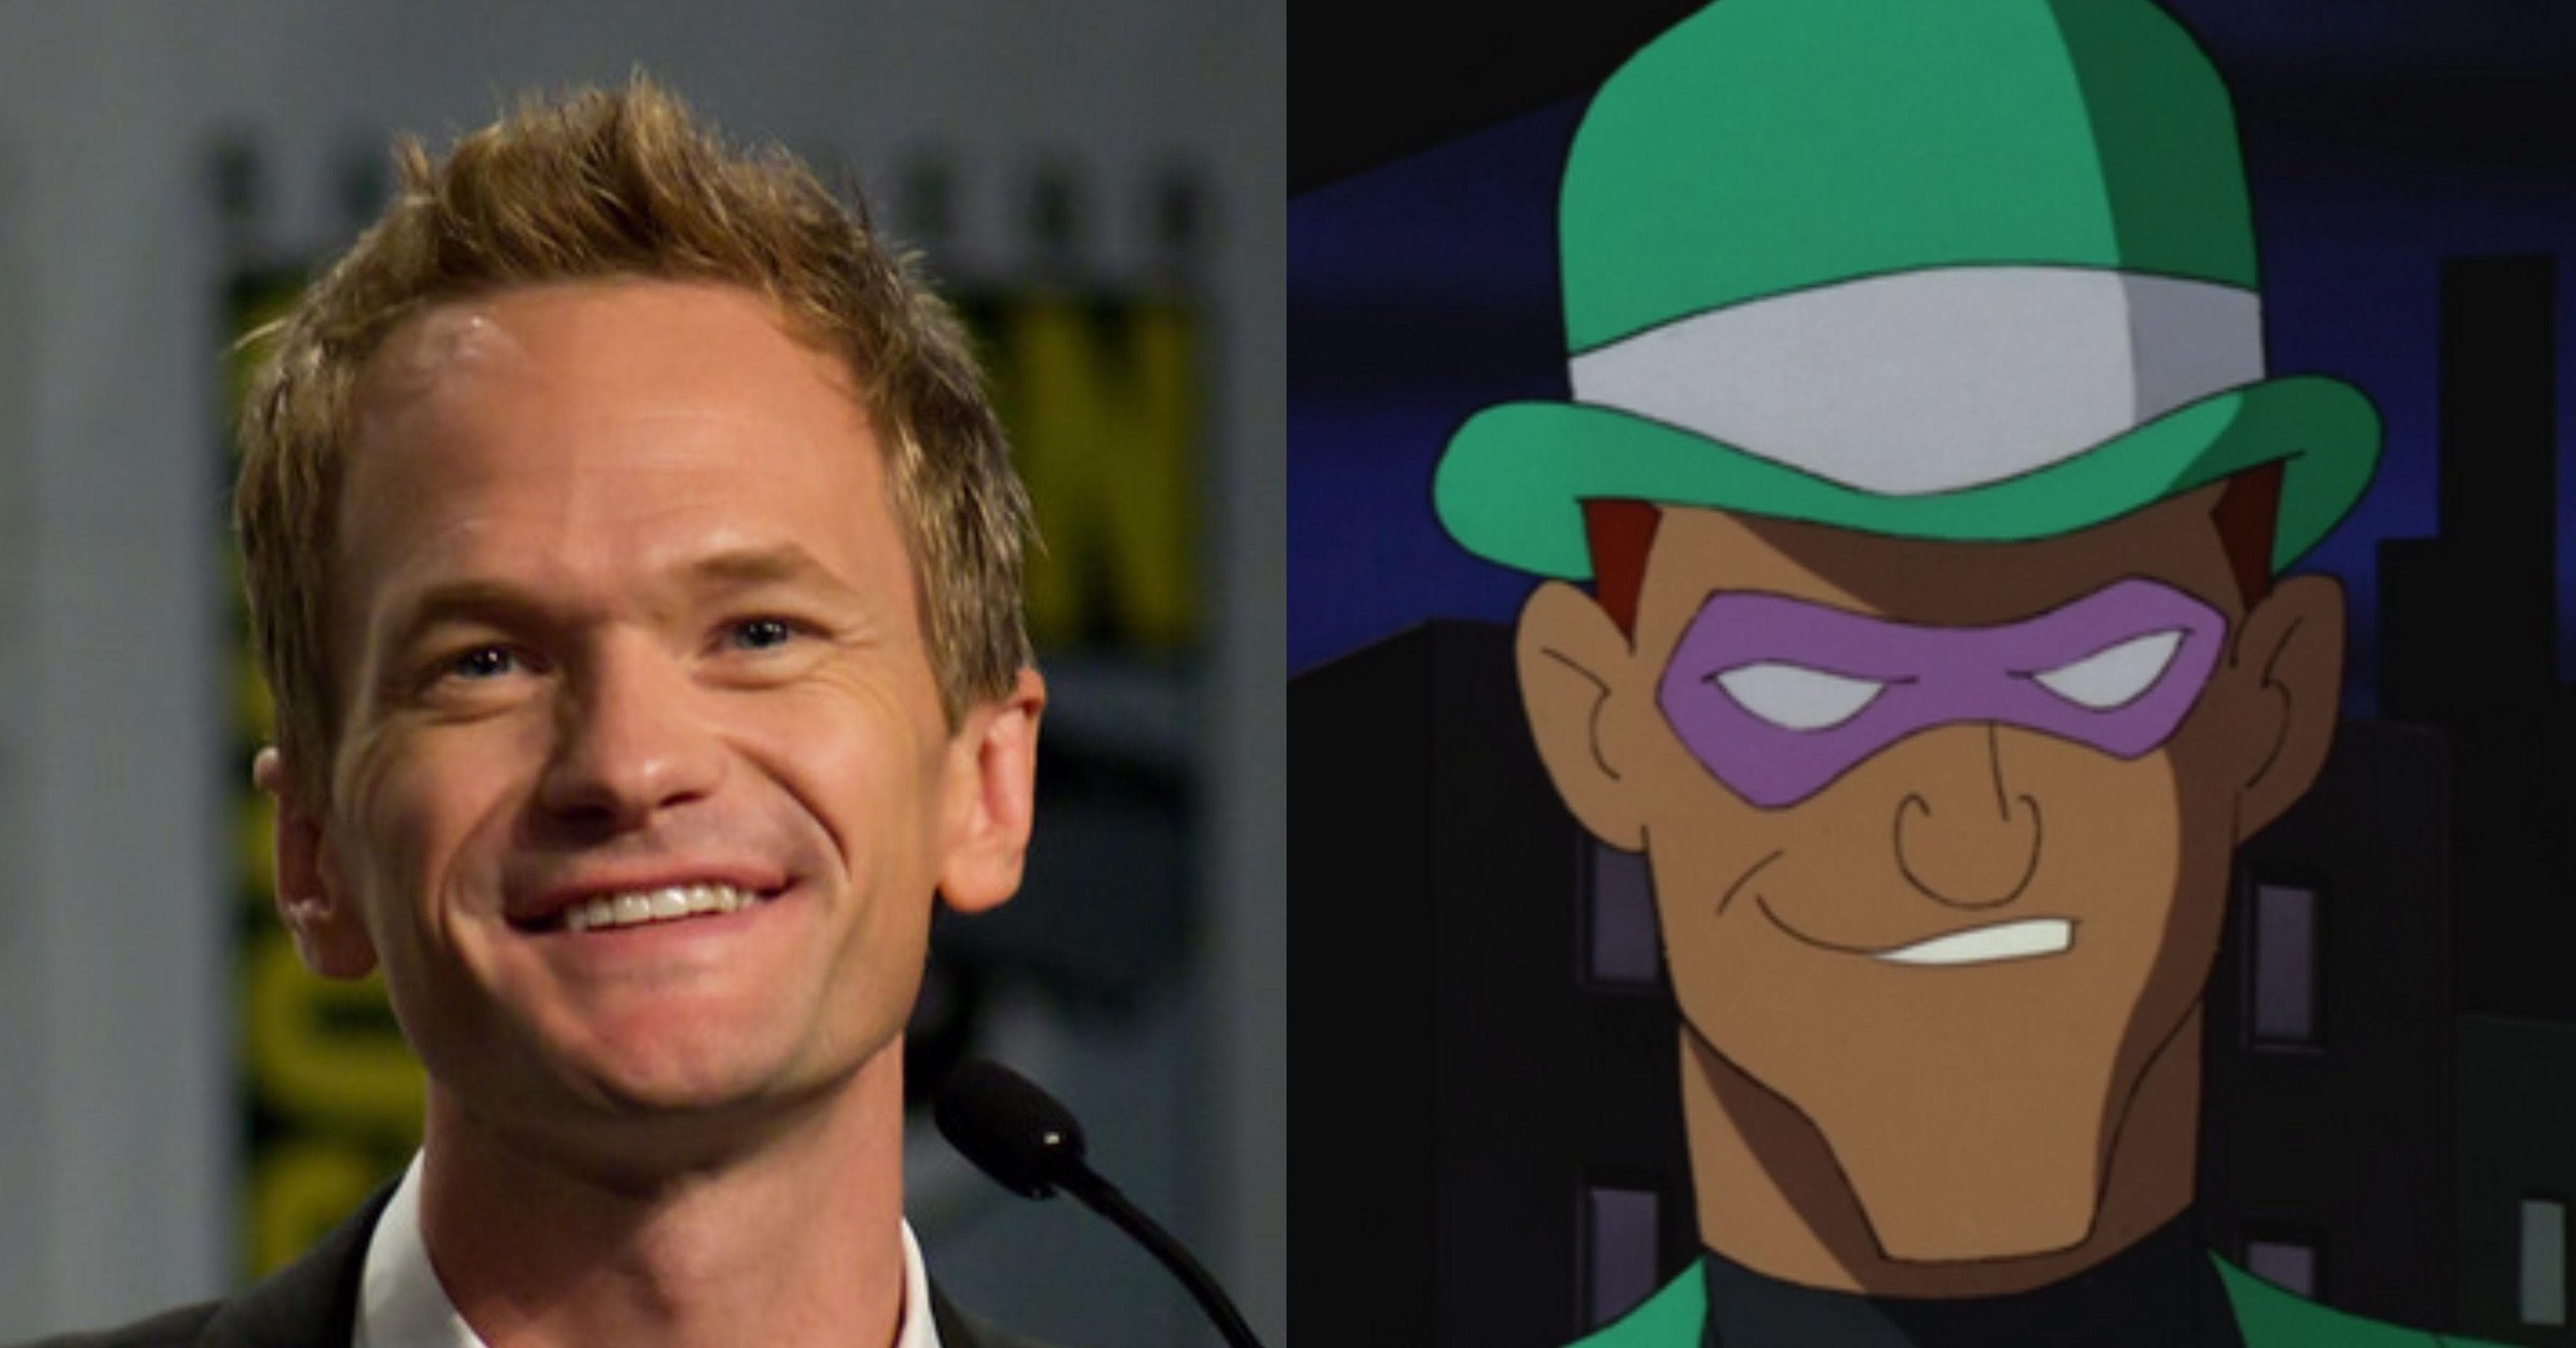 18 Famous People Who Look Exactly Like Cartoons